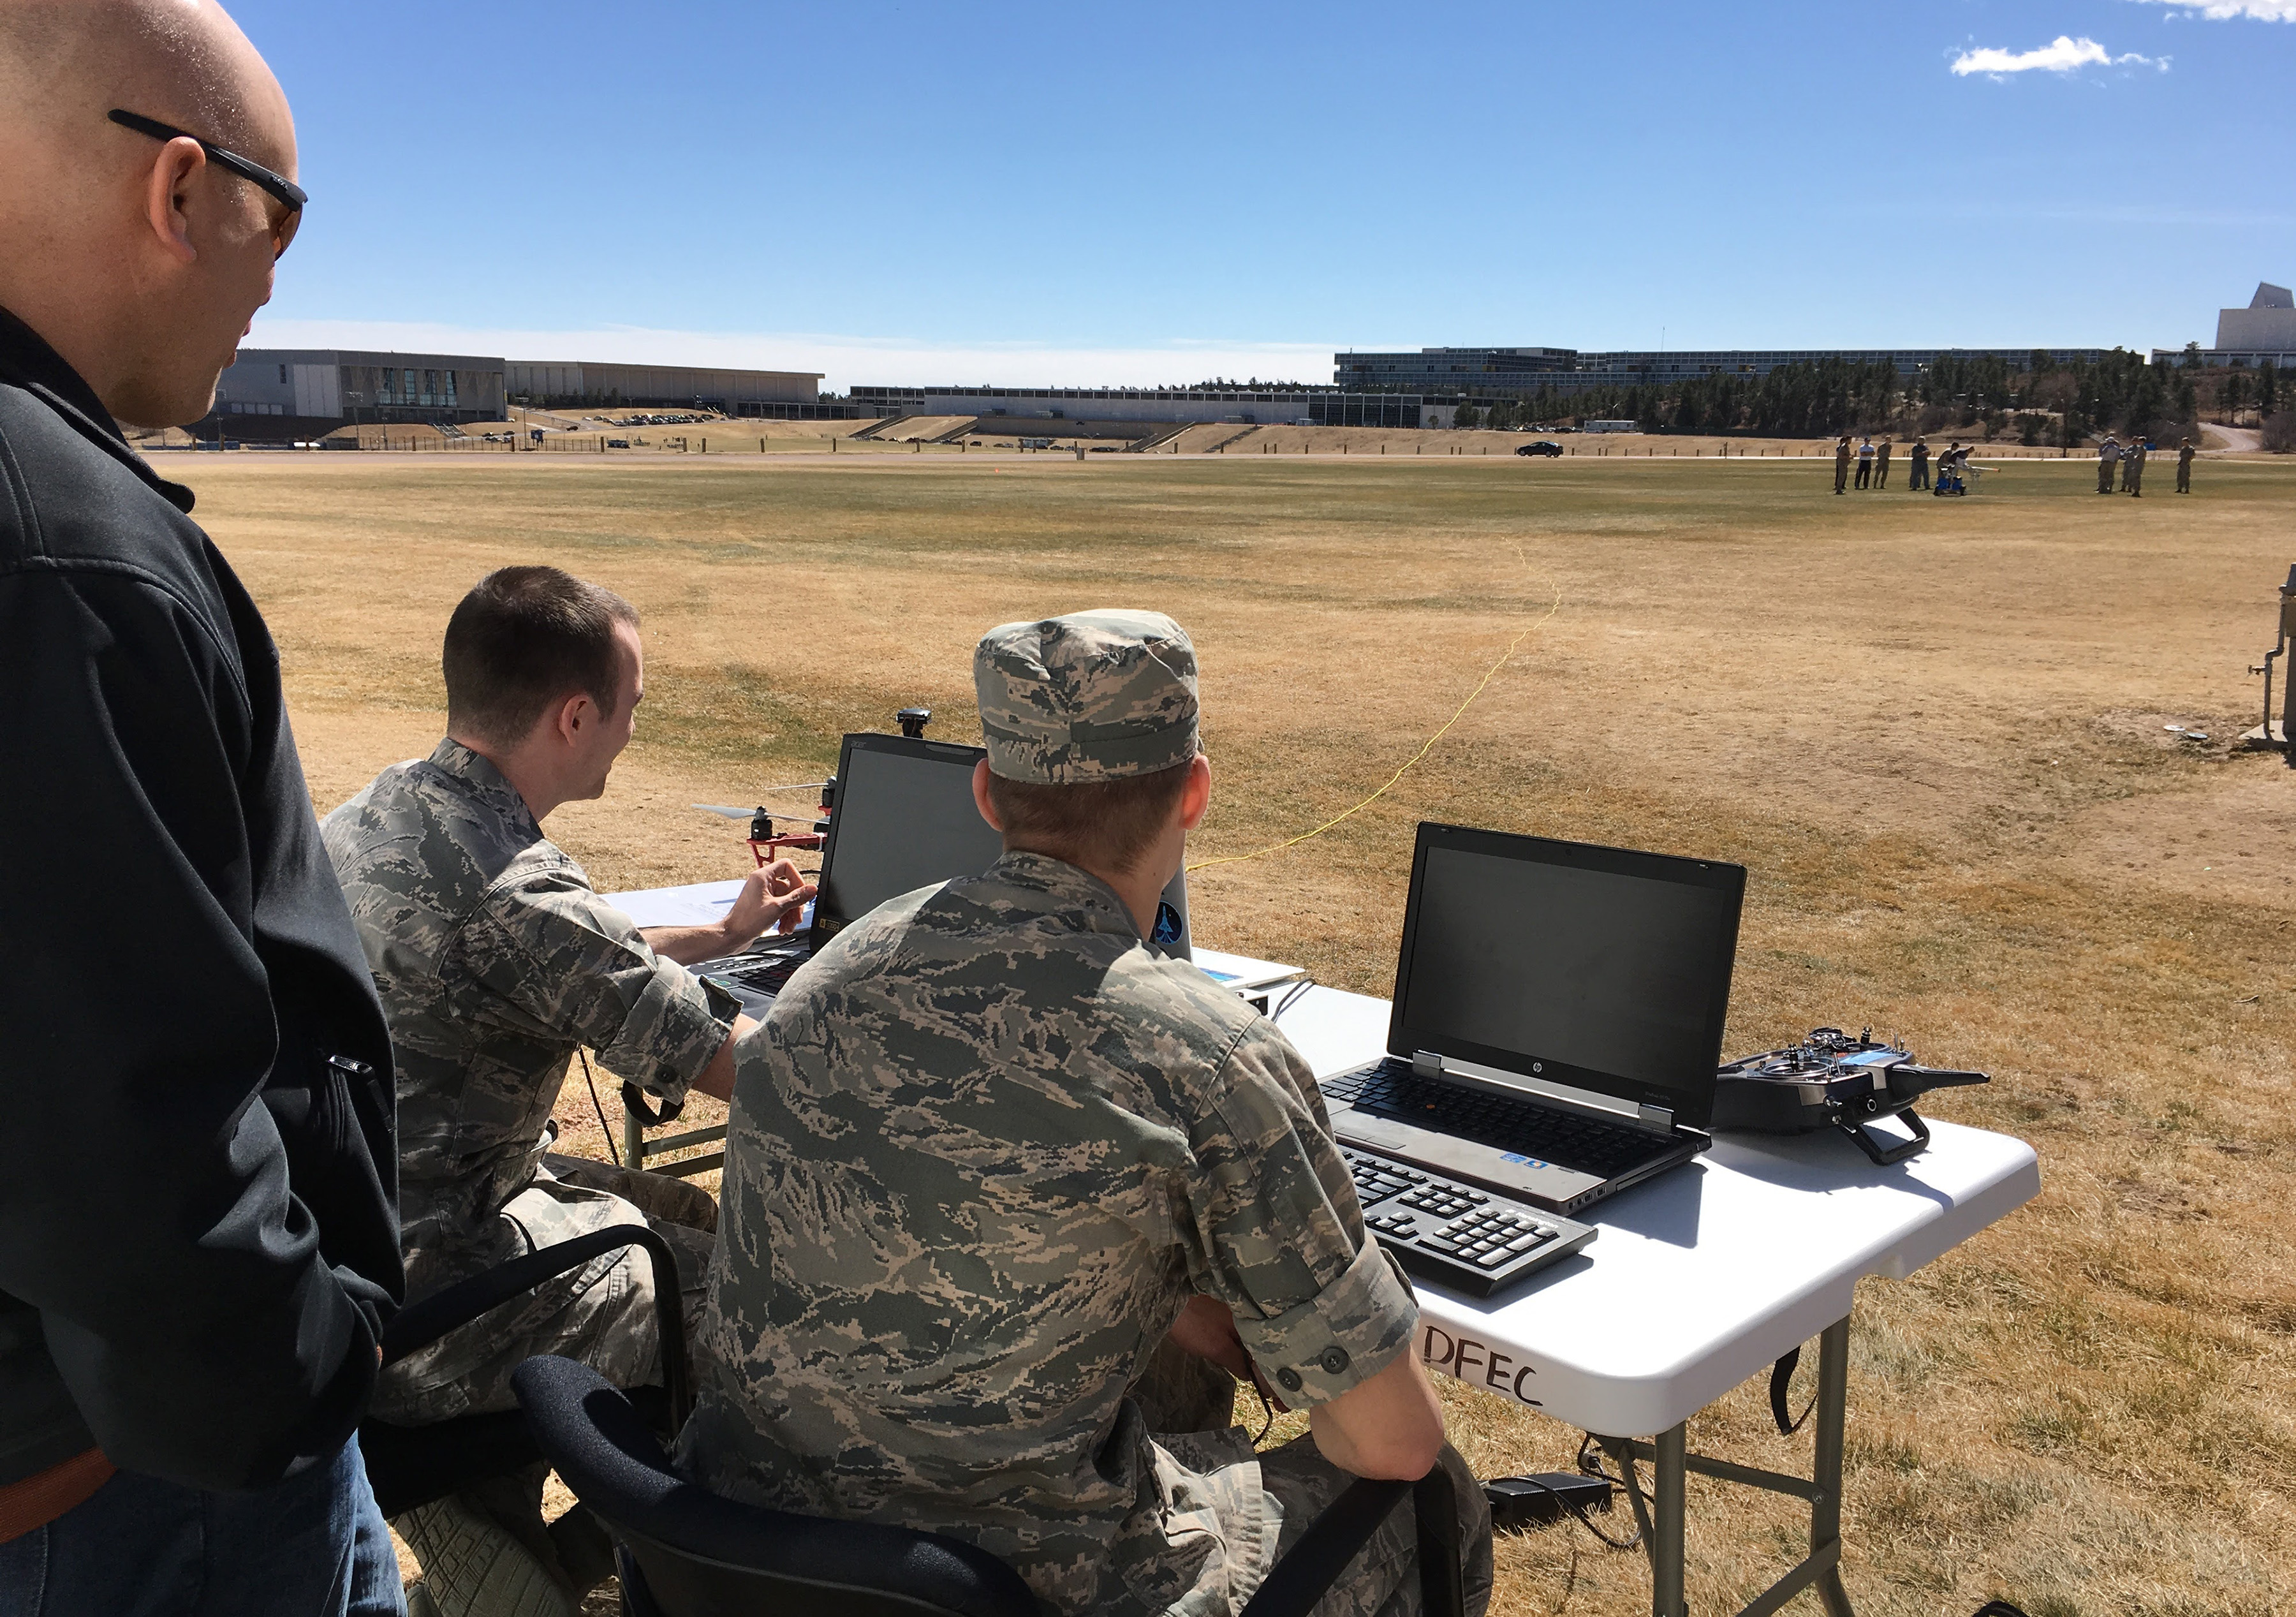 Service academy team members monitor the competition from the ground. (Credit: DARPA)